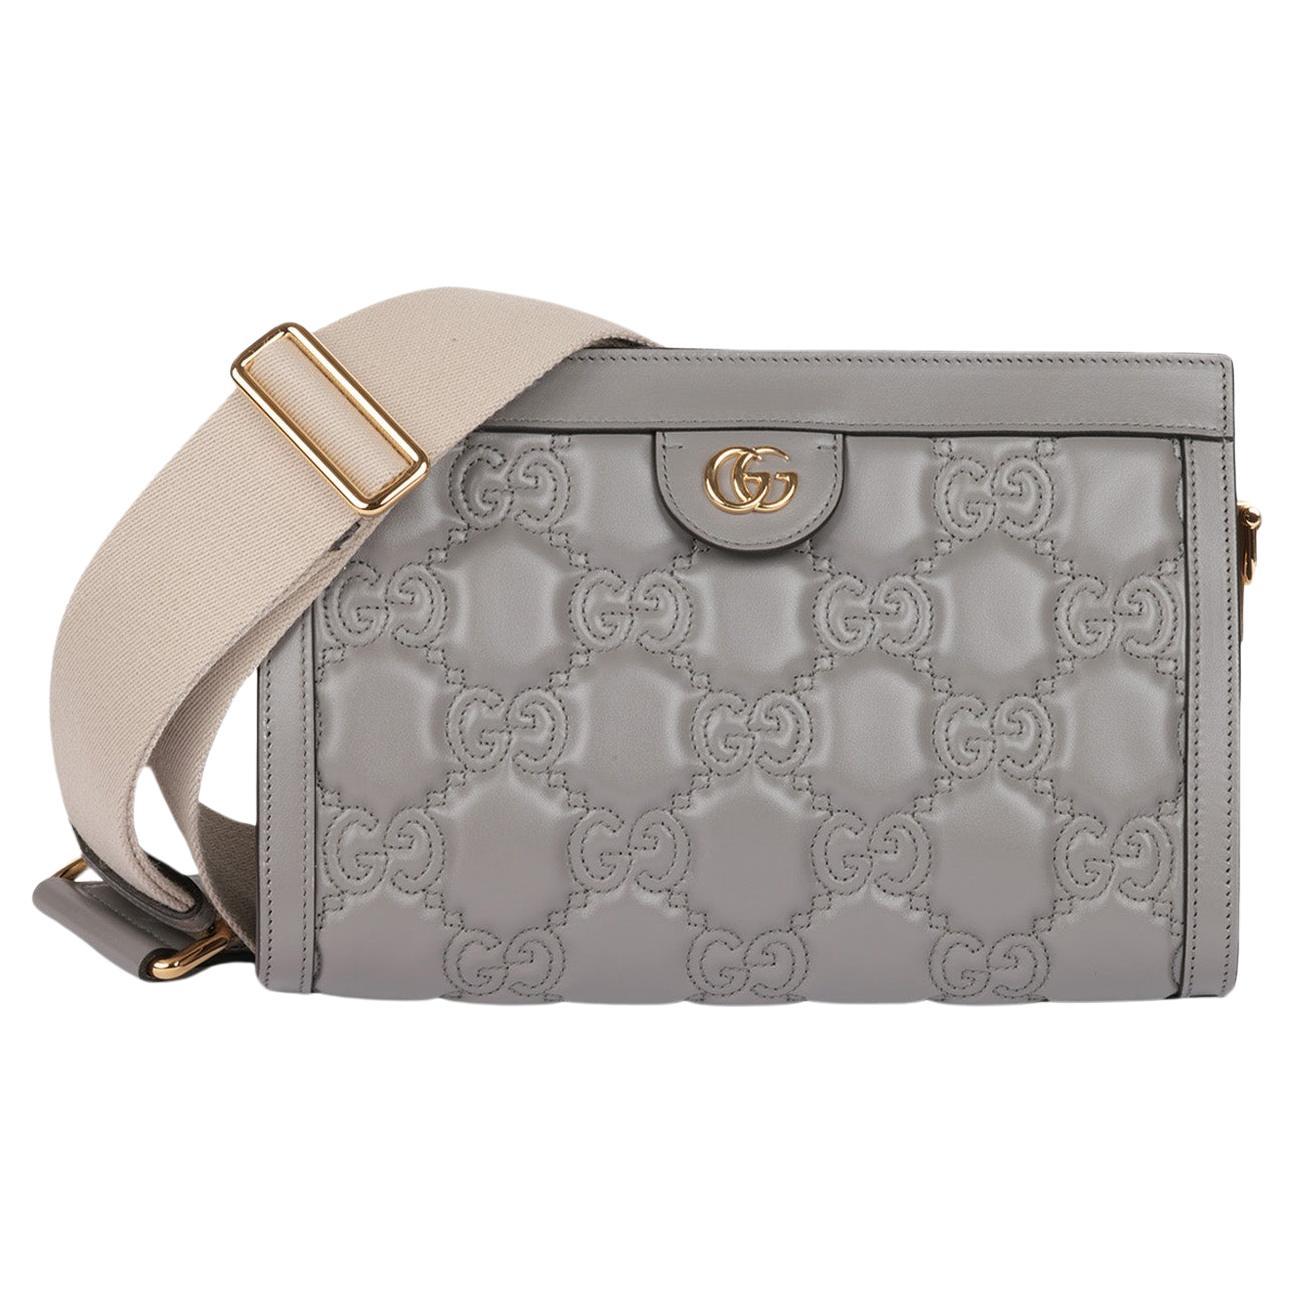 Gucci Grey GG Quilted Calfskin Leather Small Matelassé Bag For Sale